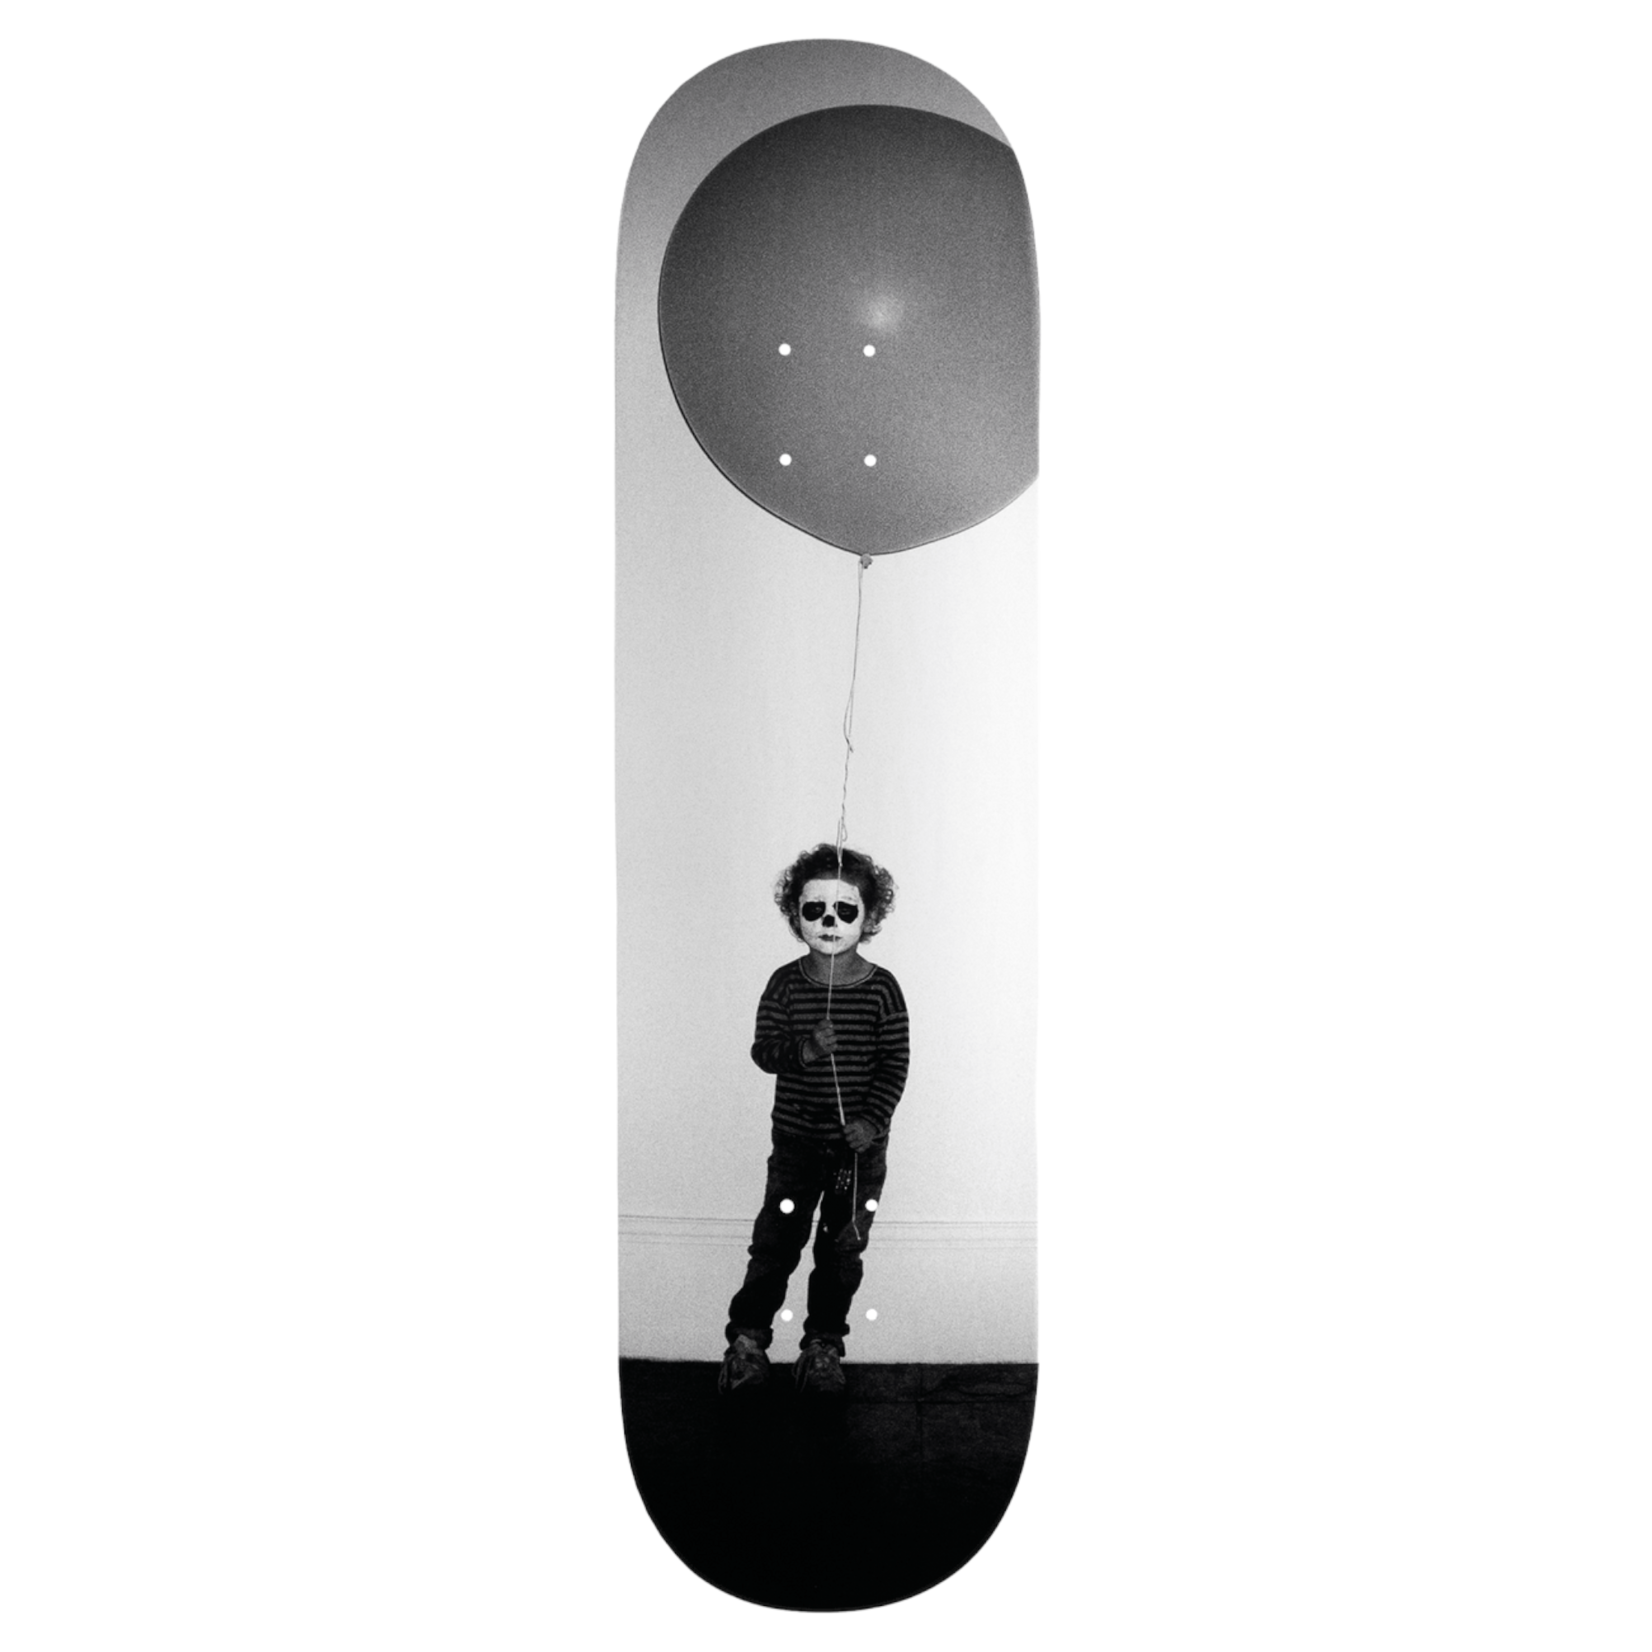 IT'S VIOLET! Violet Boy With Balloon Deck 8.0”